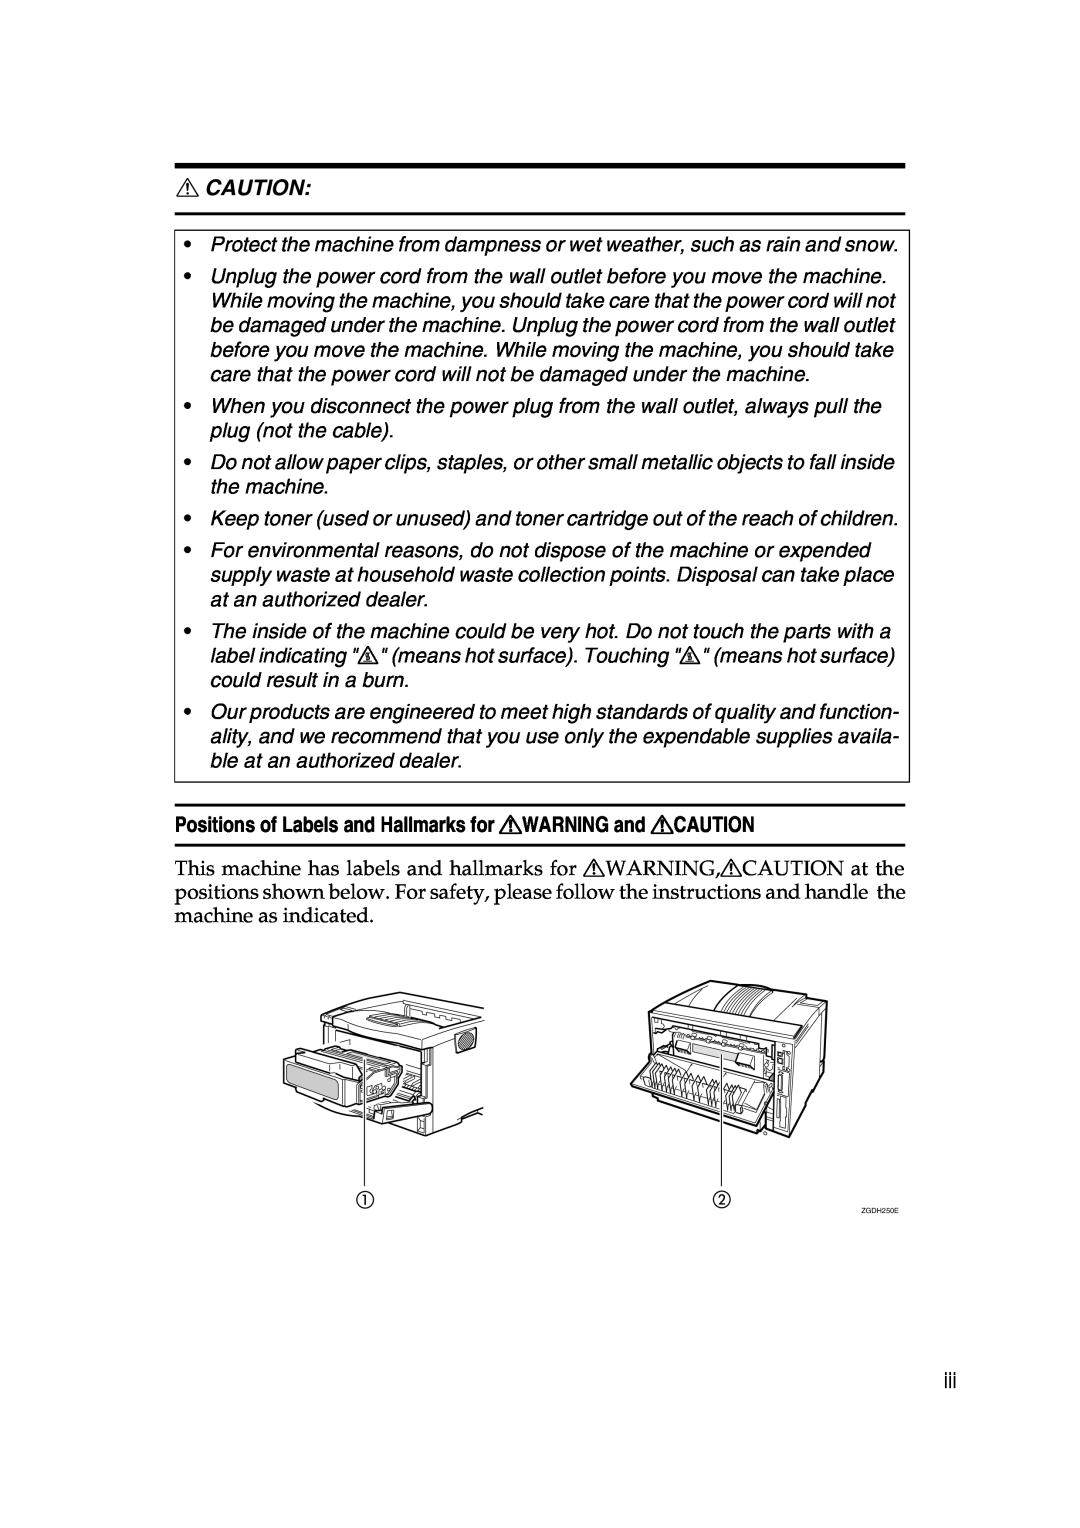 Ricoh 400780, Type B, AP2610 setup guide R Caution, Positions of Labels and Hallmarks for RWARNING and RCAUTION 